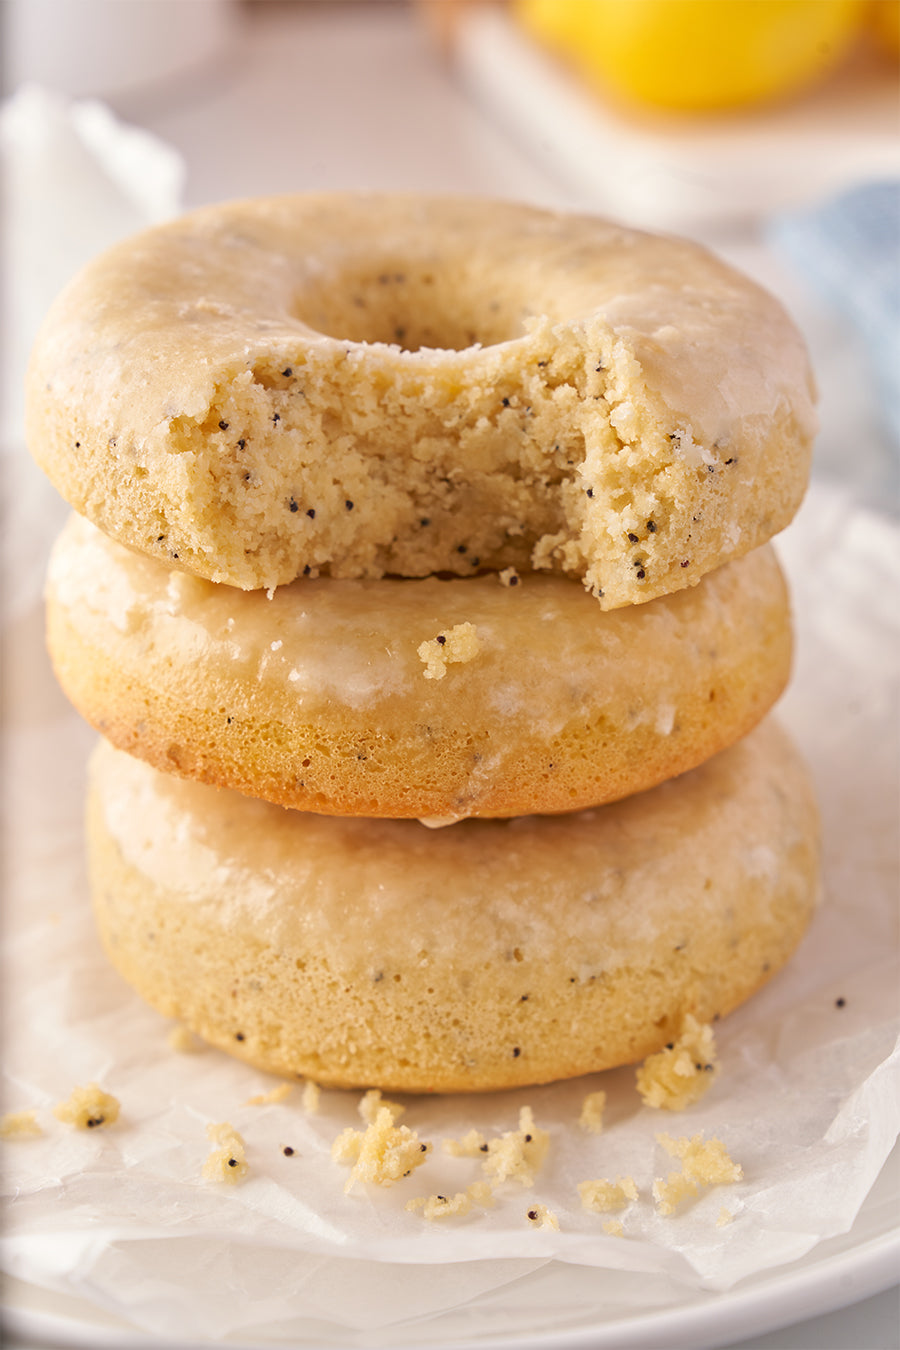 Vanilla Lemon Poppy Seed Donuts Carbs Me Out!